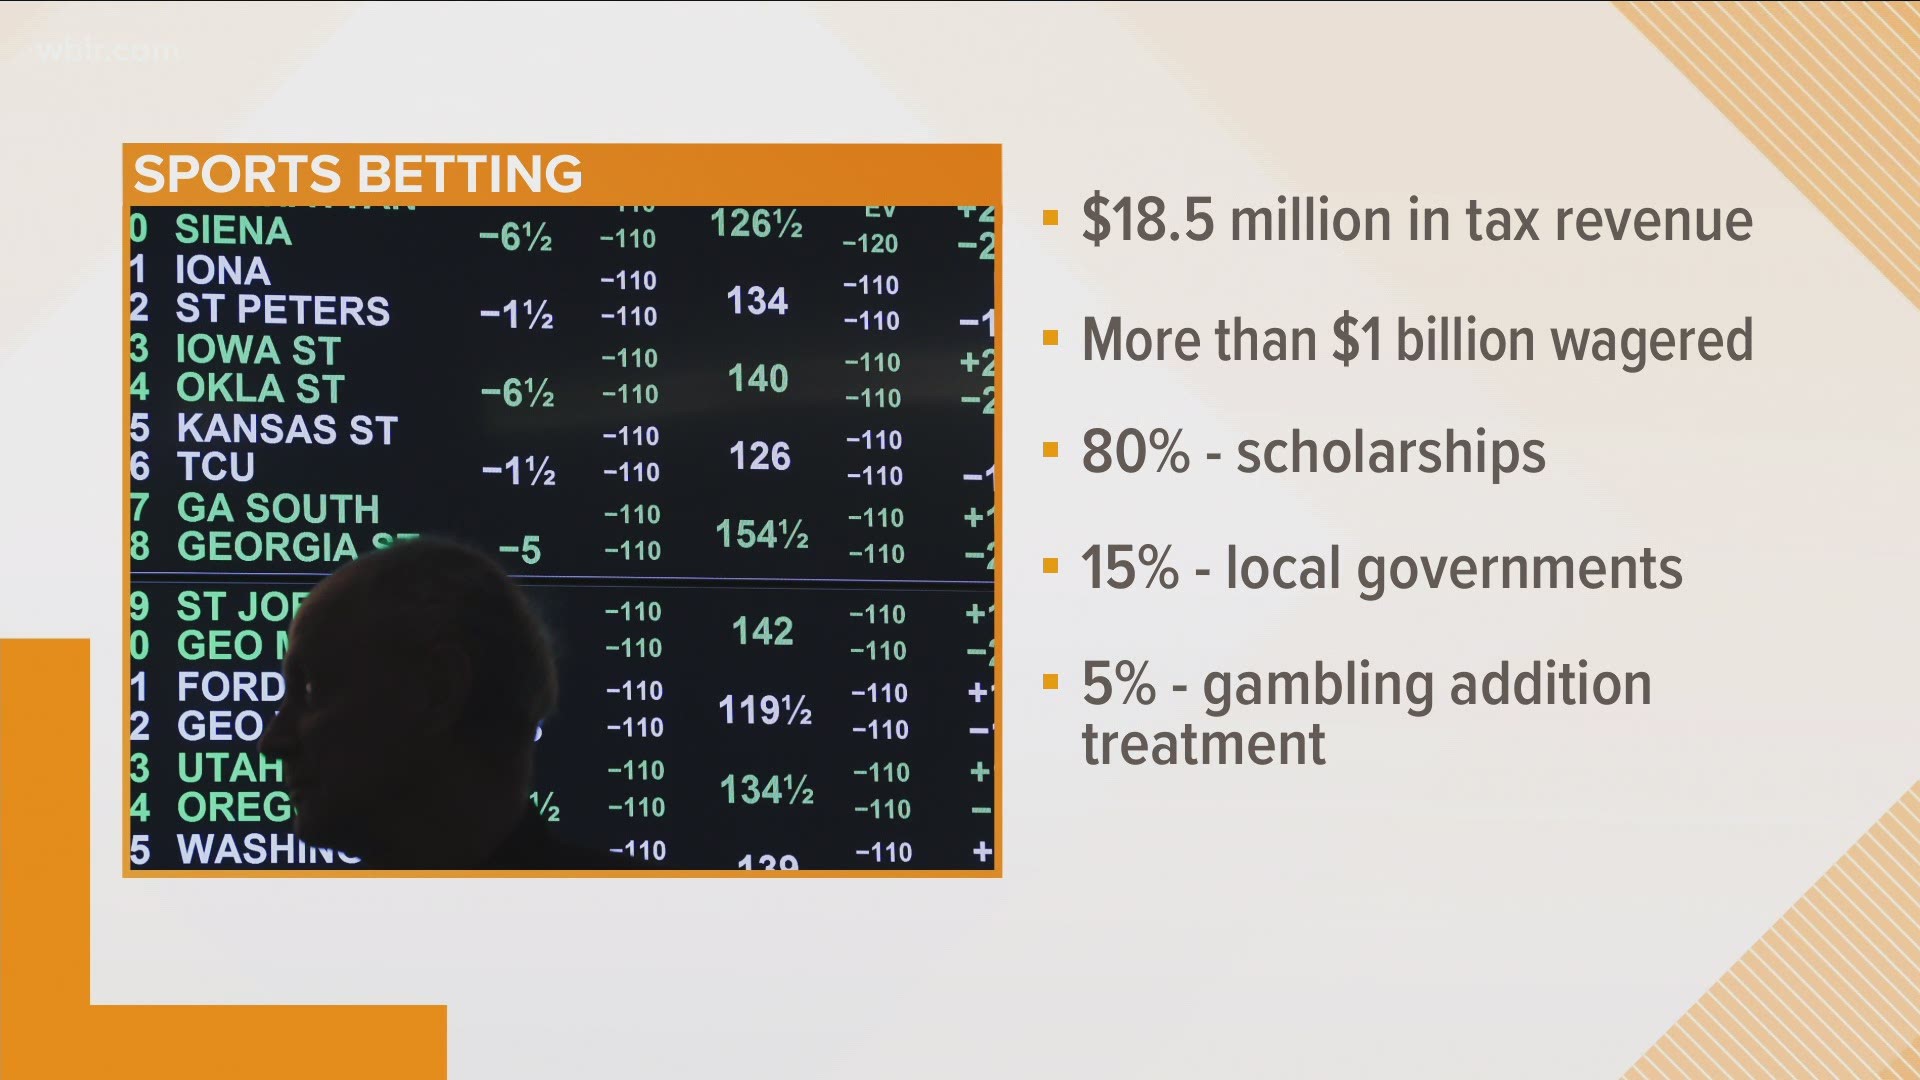 On Tuesday, Tennessee Lottery CEO Rebecca Hargrove told the state's Sports Wagering Advisory Council that the gross handle of bets placed has topped $1 billion.